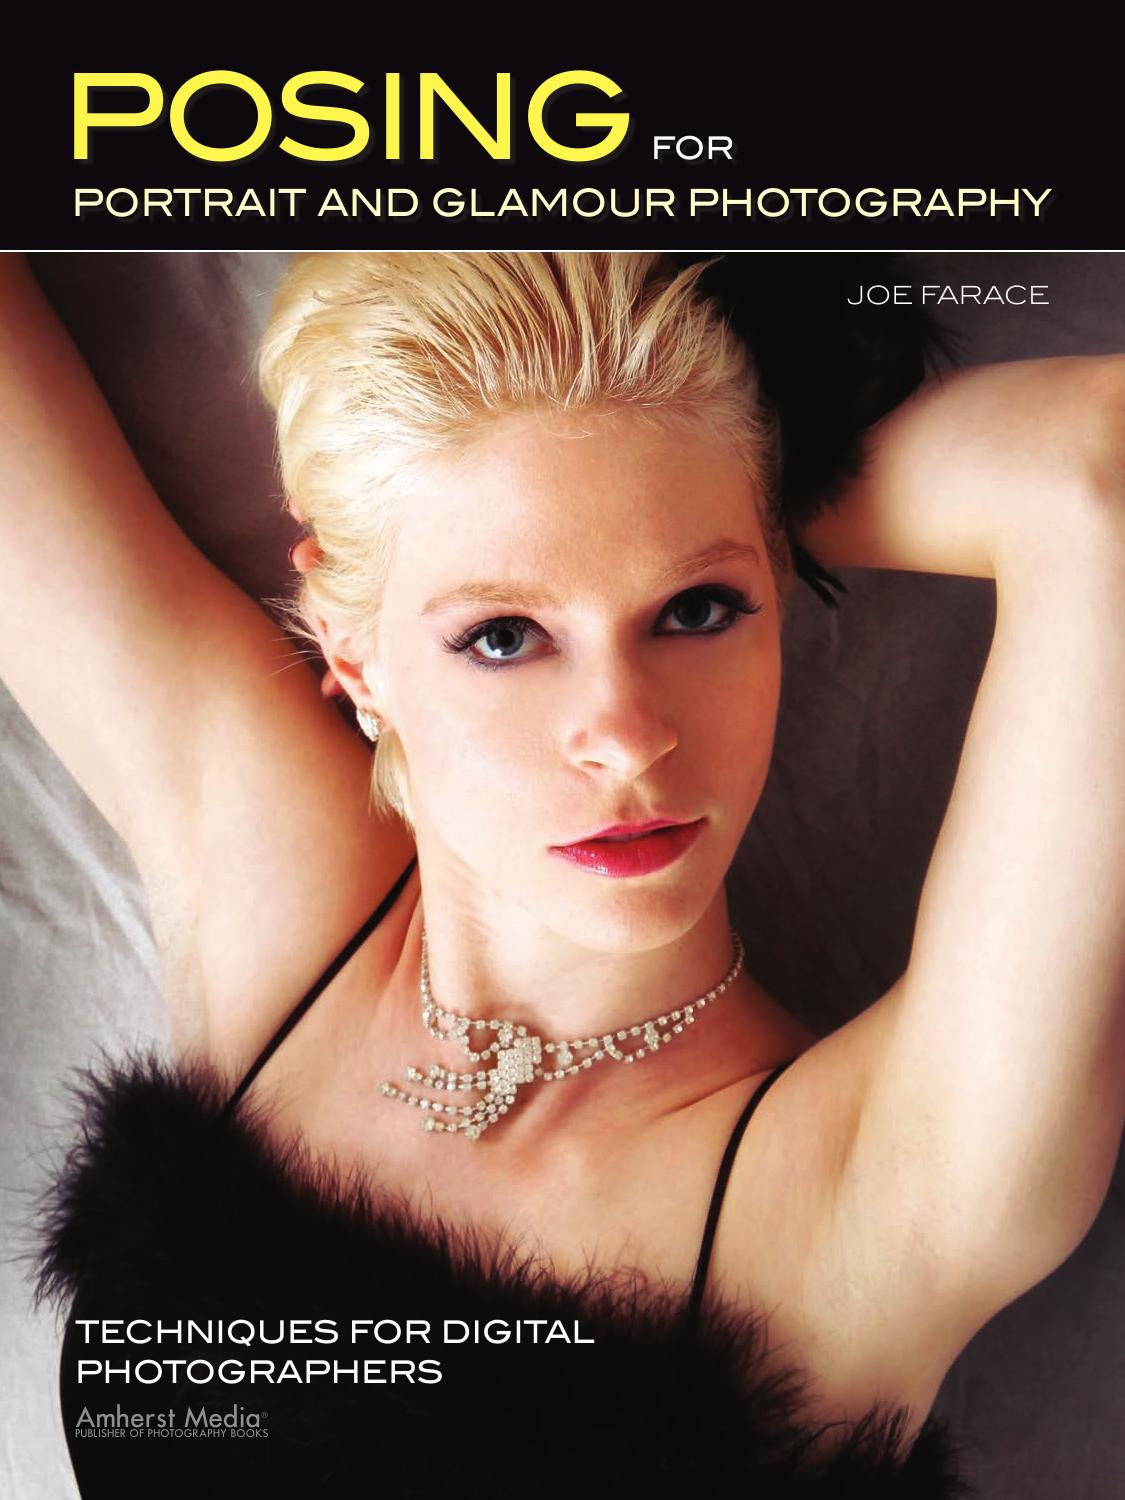 Posing for Portrait and Glamour Photography by Joe Farace